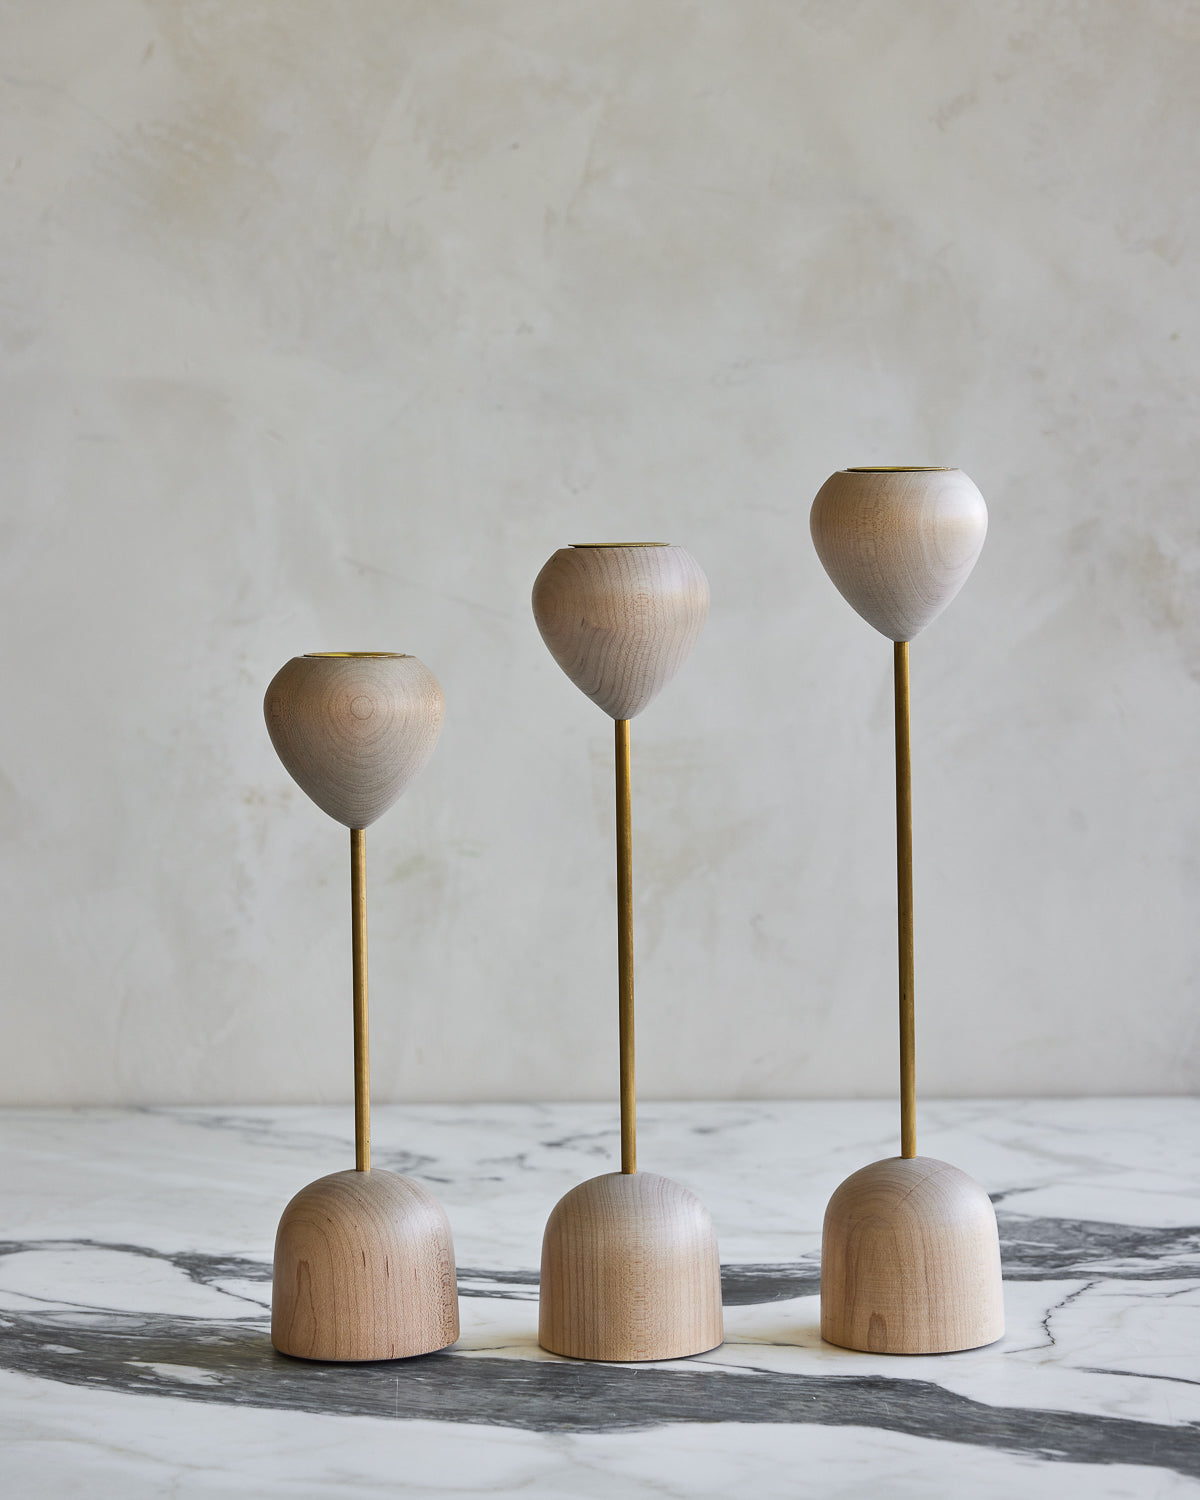 Tulip Candle Holders - Maple